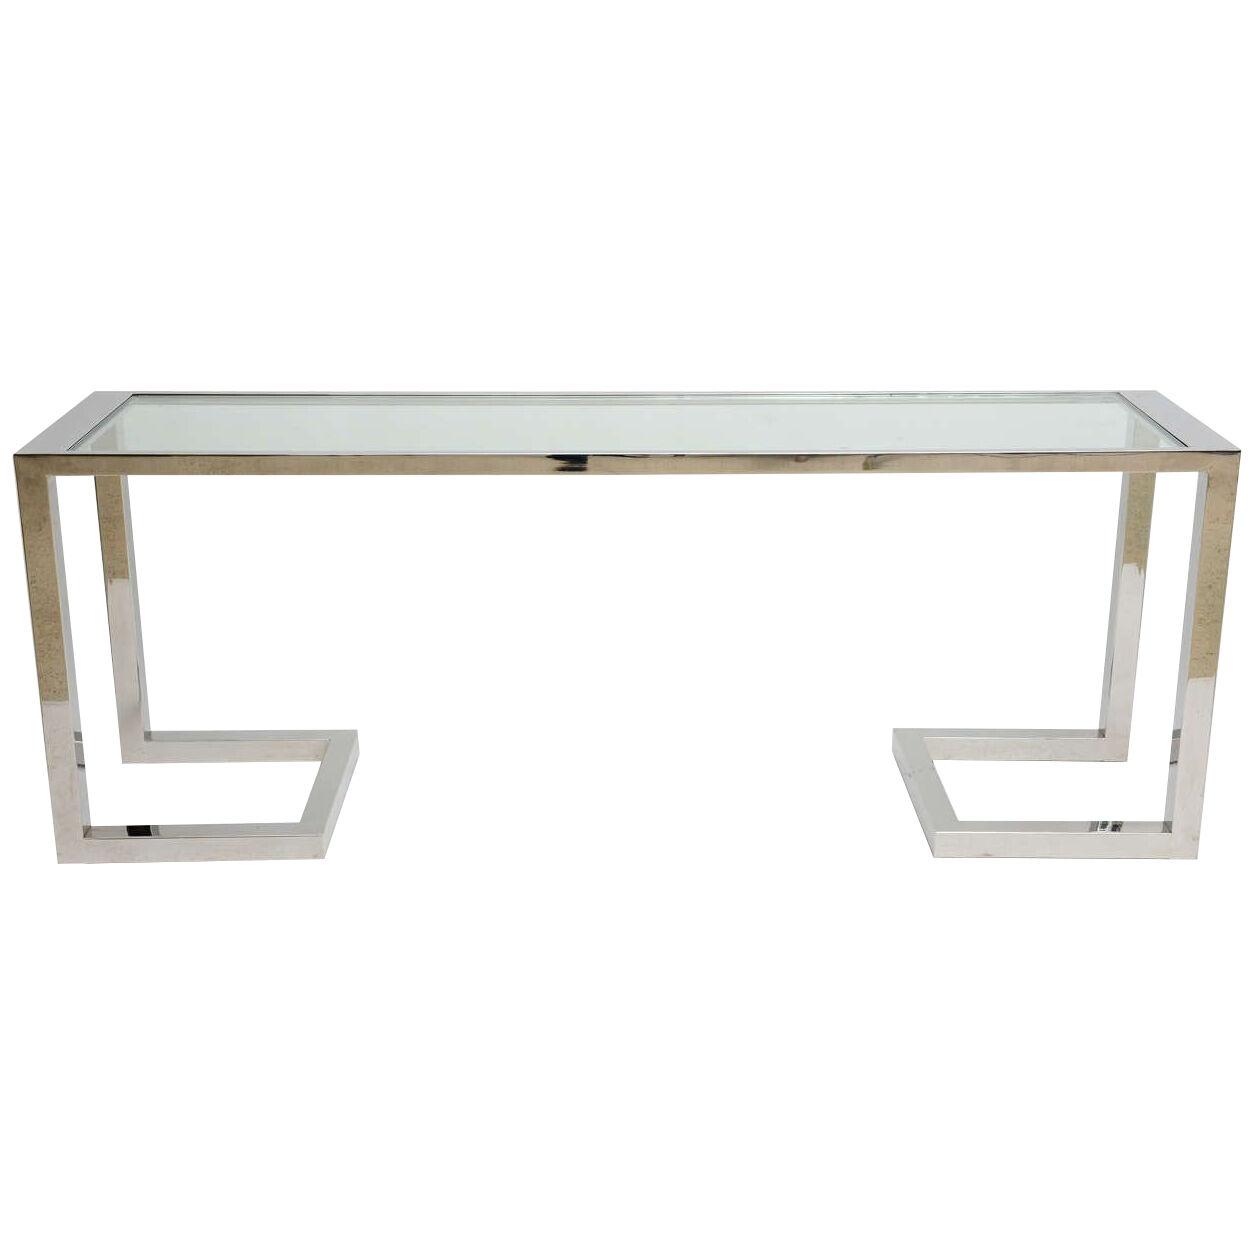 Large American Modern Polished Chrome and Glass Console, Milo Baughman